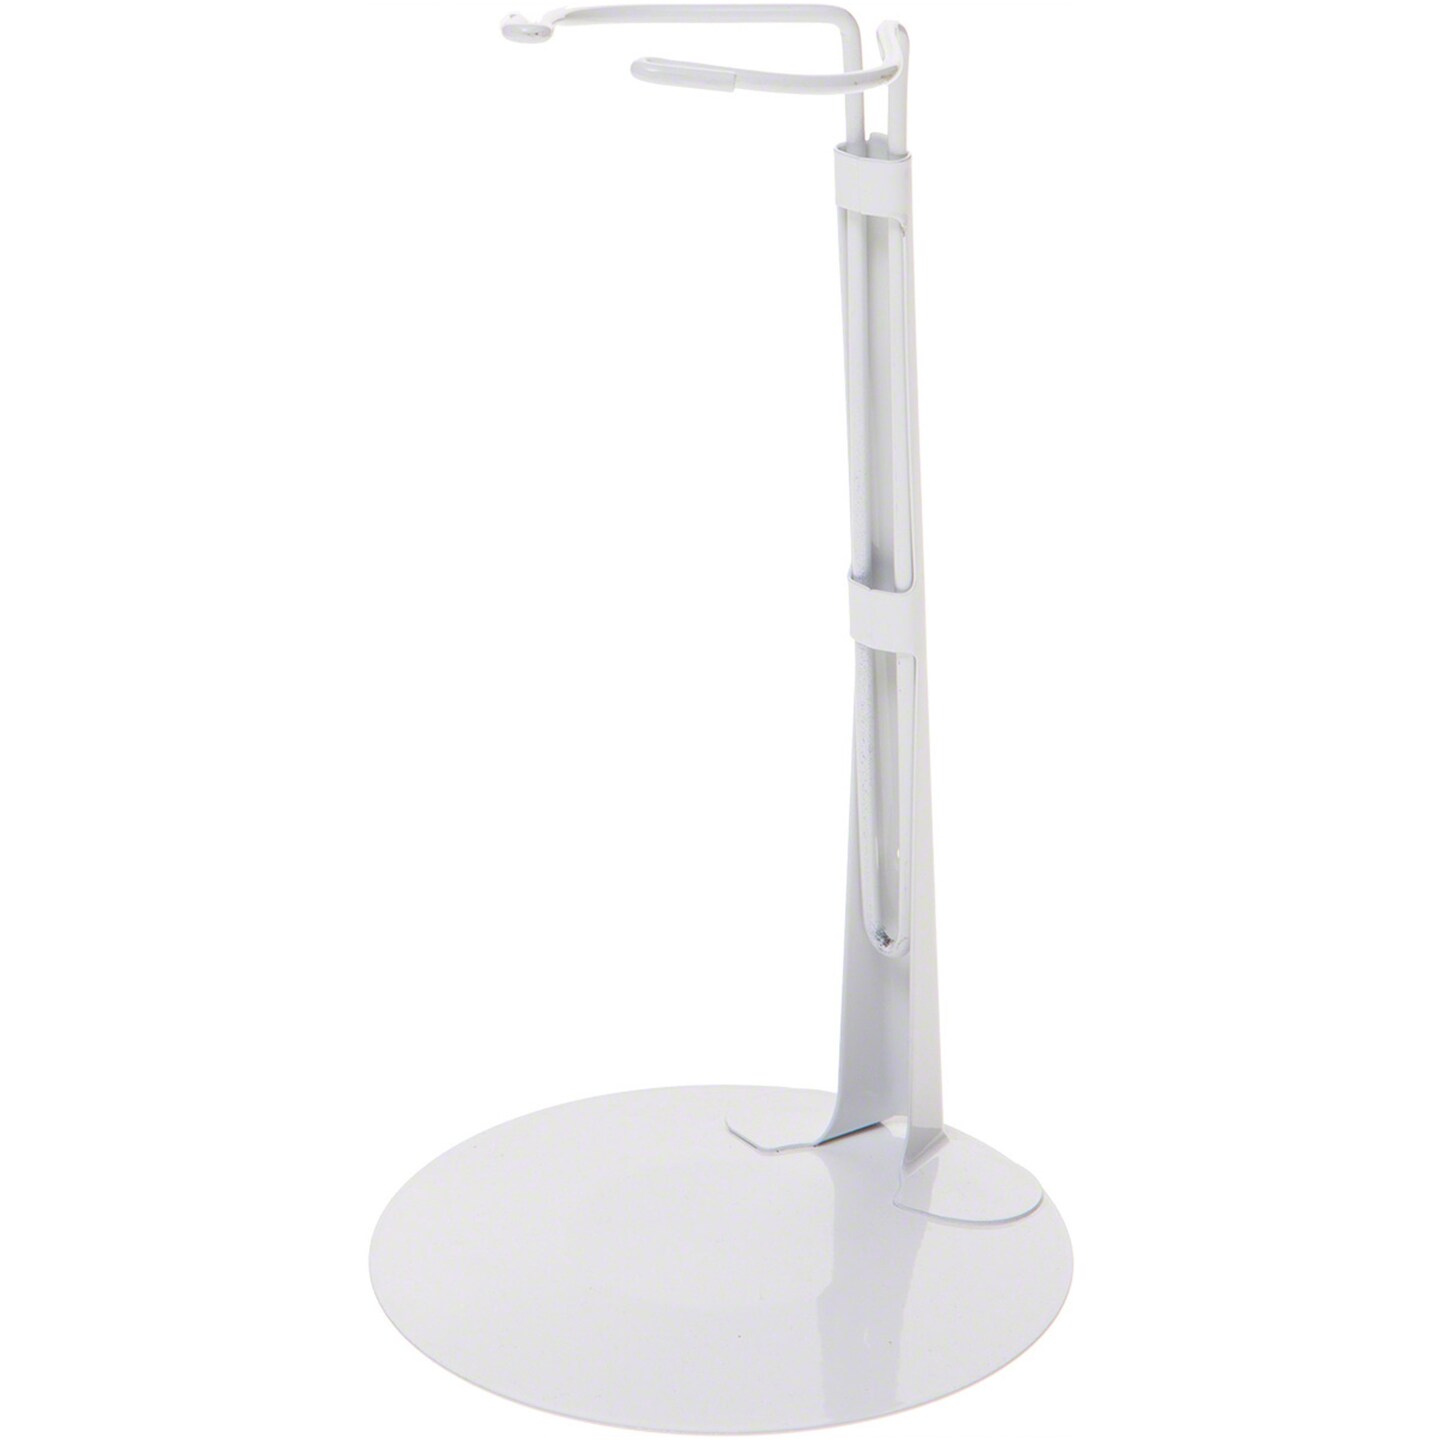 Kaiser 2601 White Adjustable Doll Stand, fits 14 to 22 inch Dolls, waist width adjusts from 2 to 2.5 inches